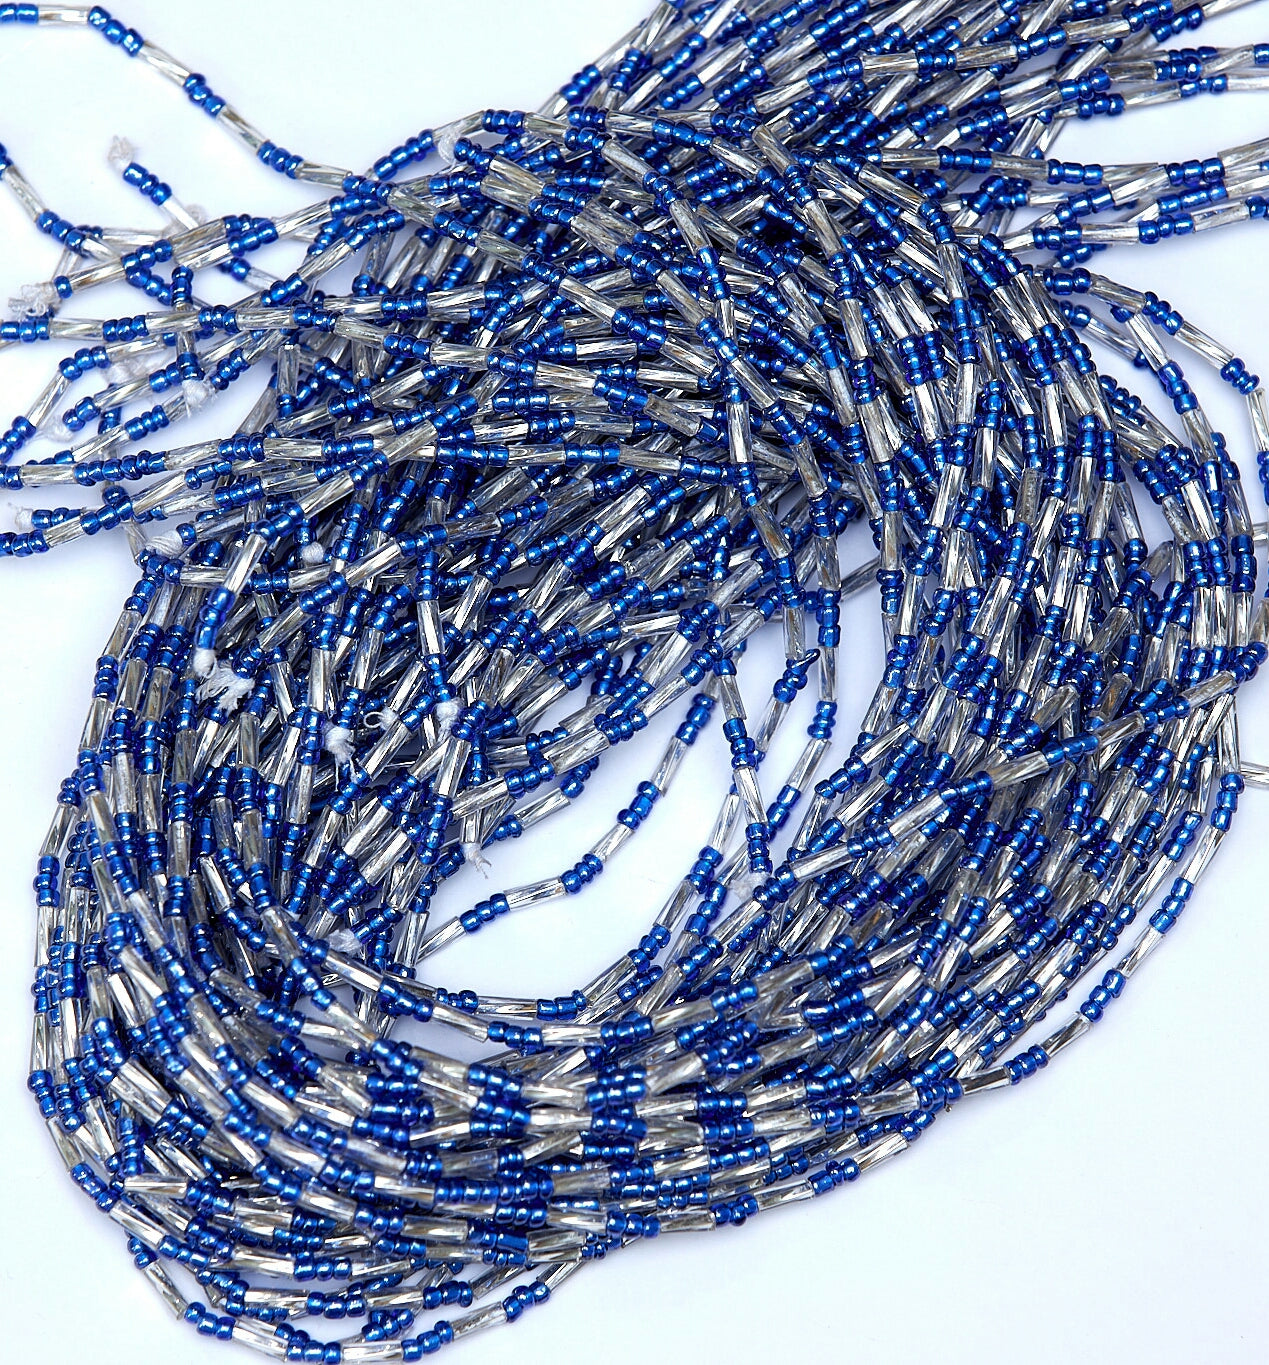 46 Inches Blue beads with Silver bars tie on waist beads